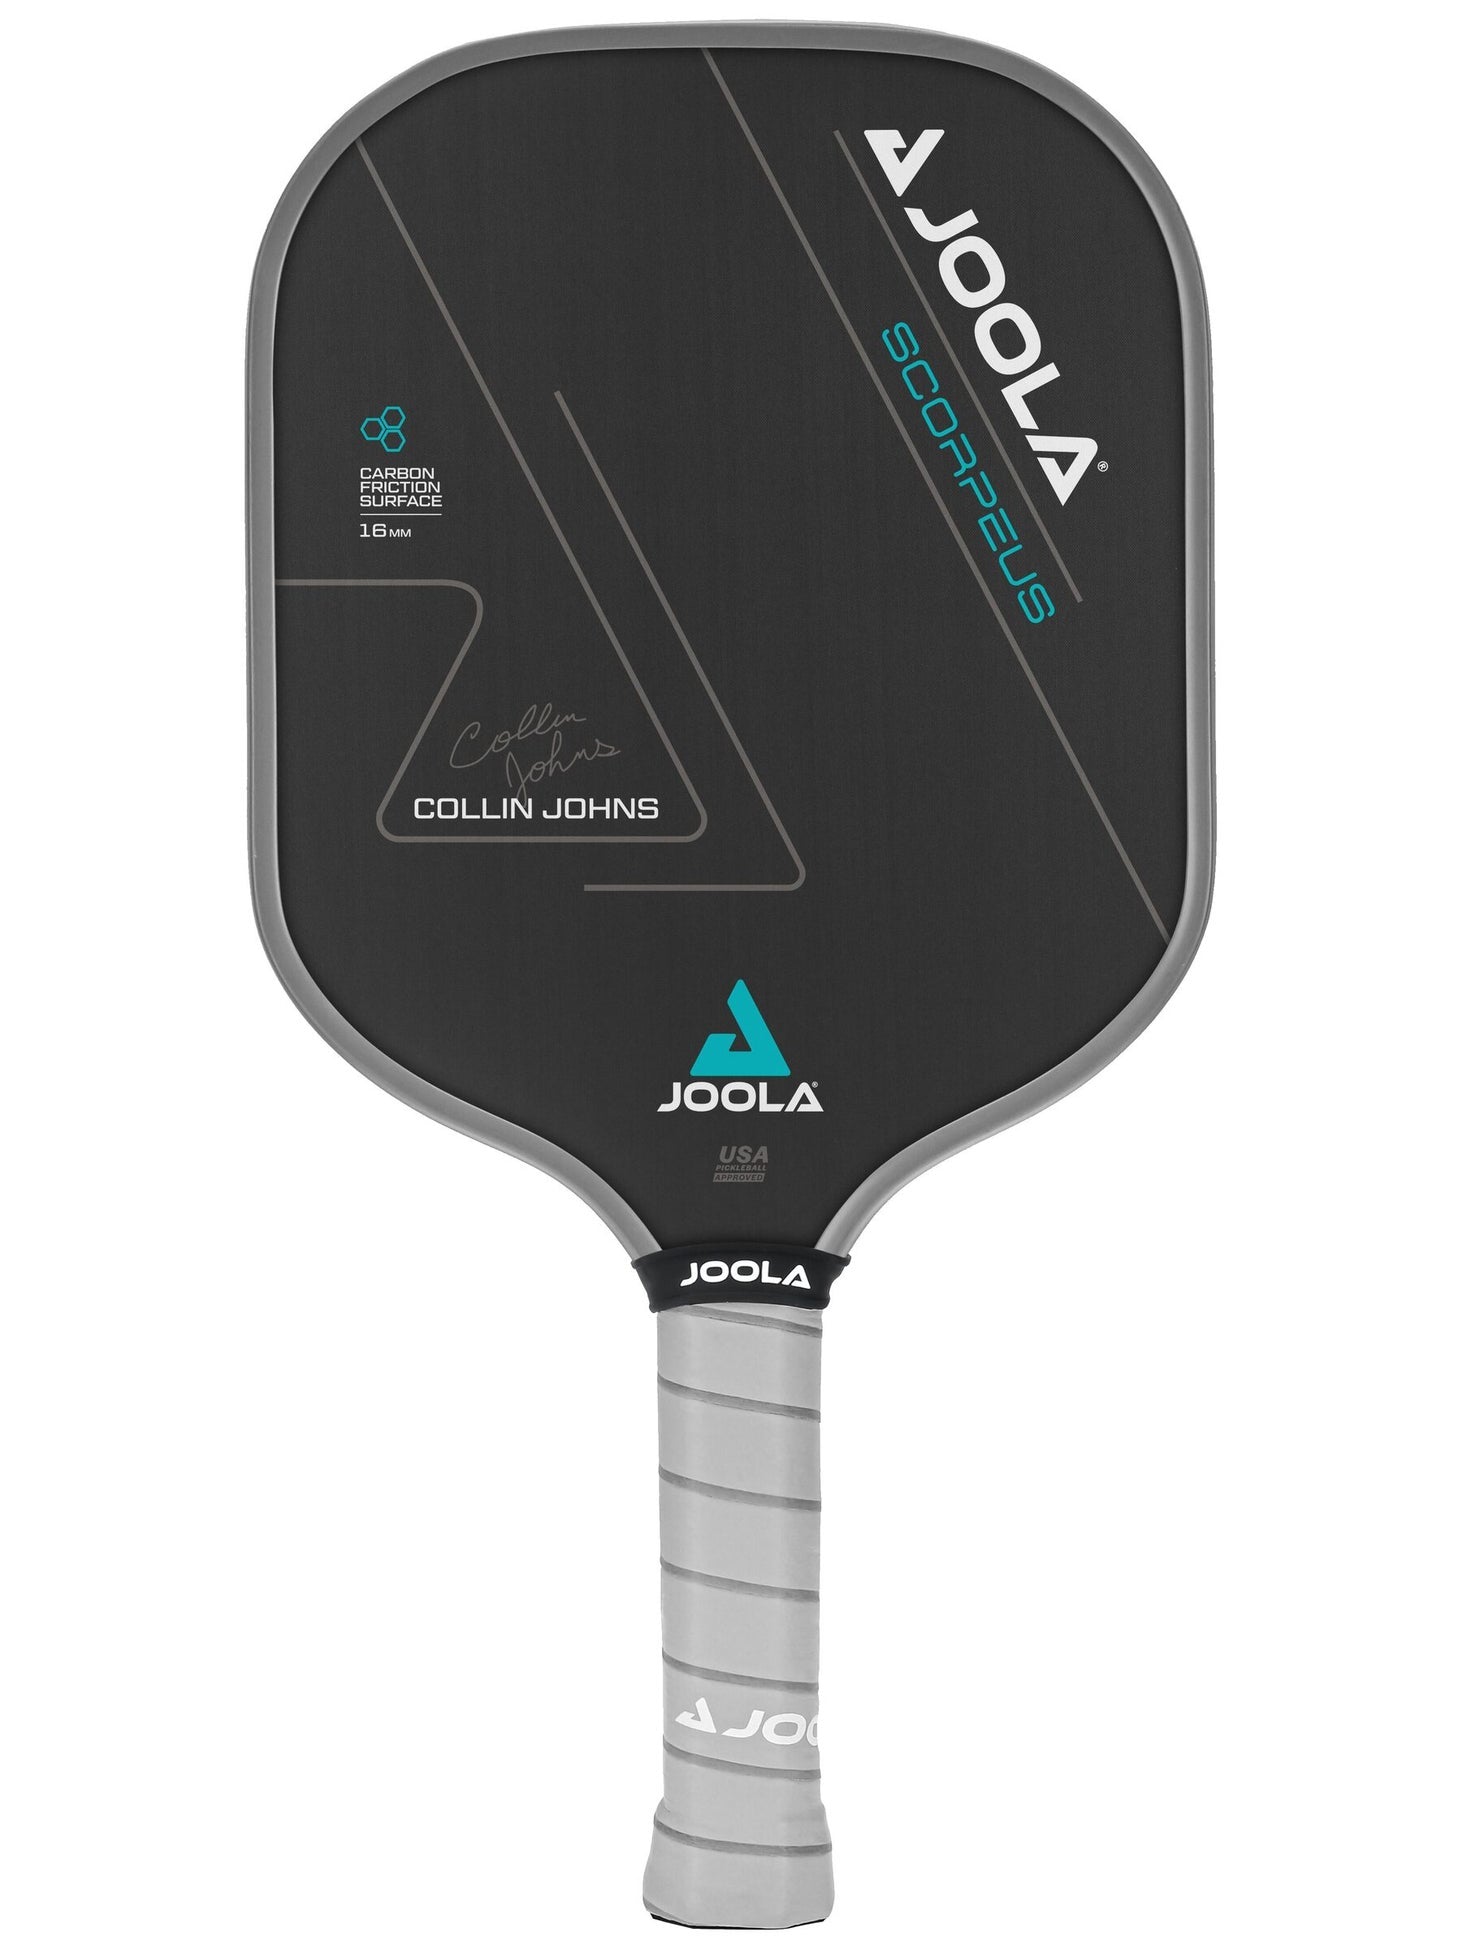 The pickleball paddle is shown on a white background.